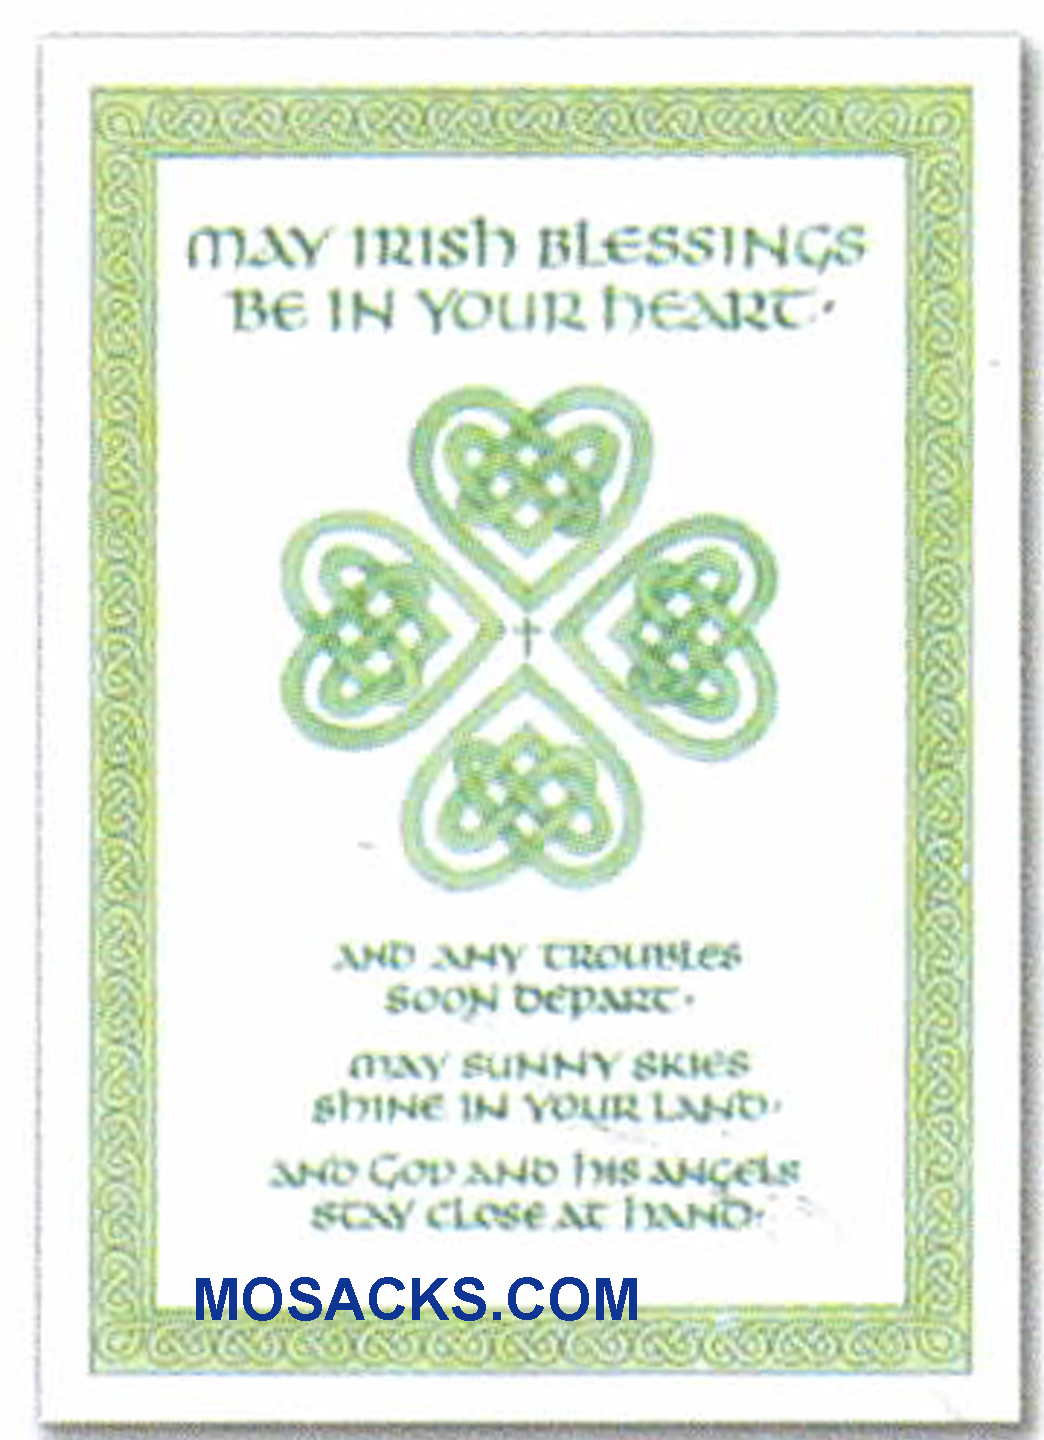 May Irish Blessings Be In Your Heart... Irish Blessings Note Card -WCB1611